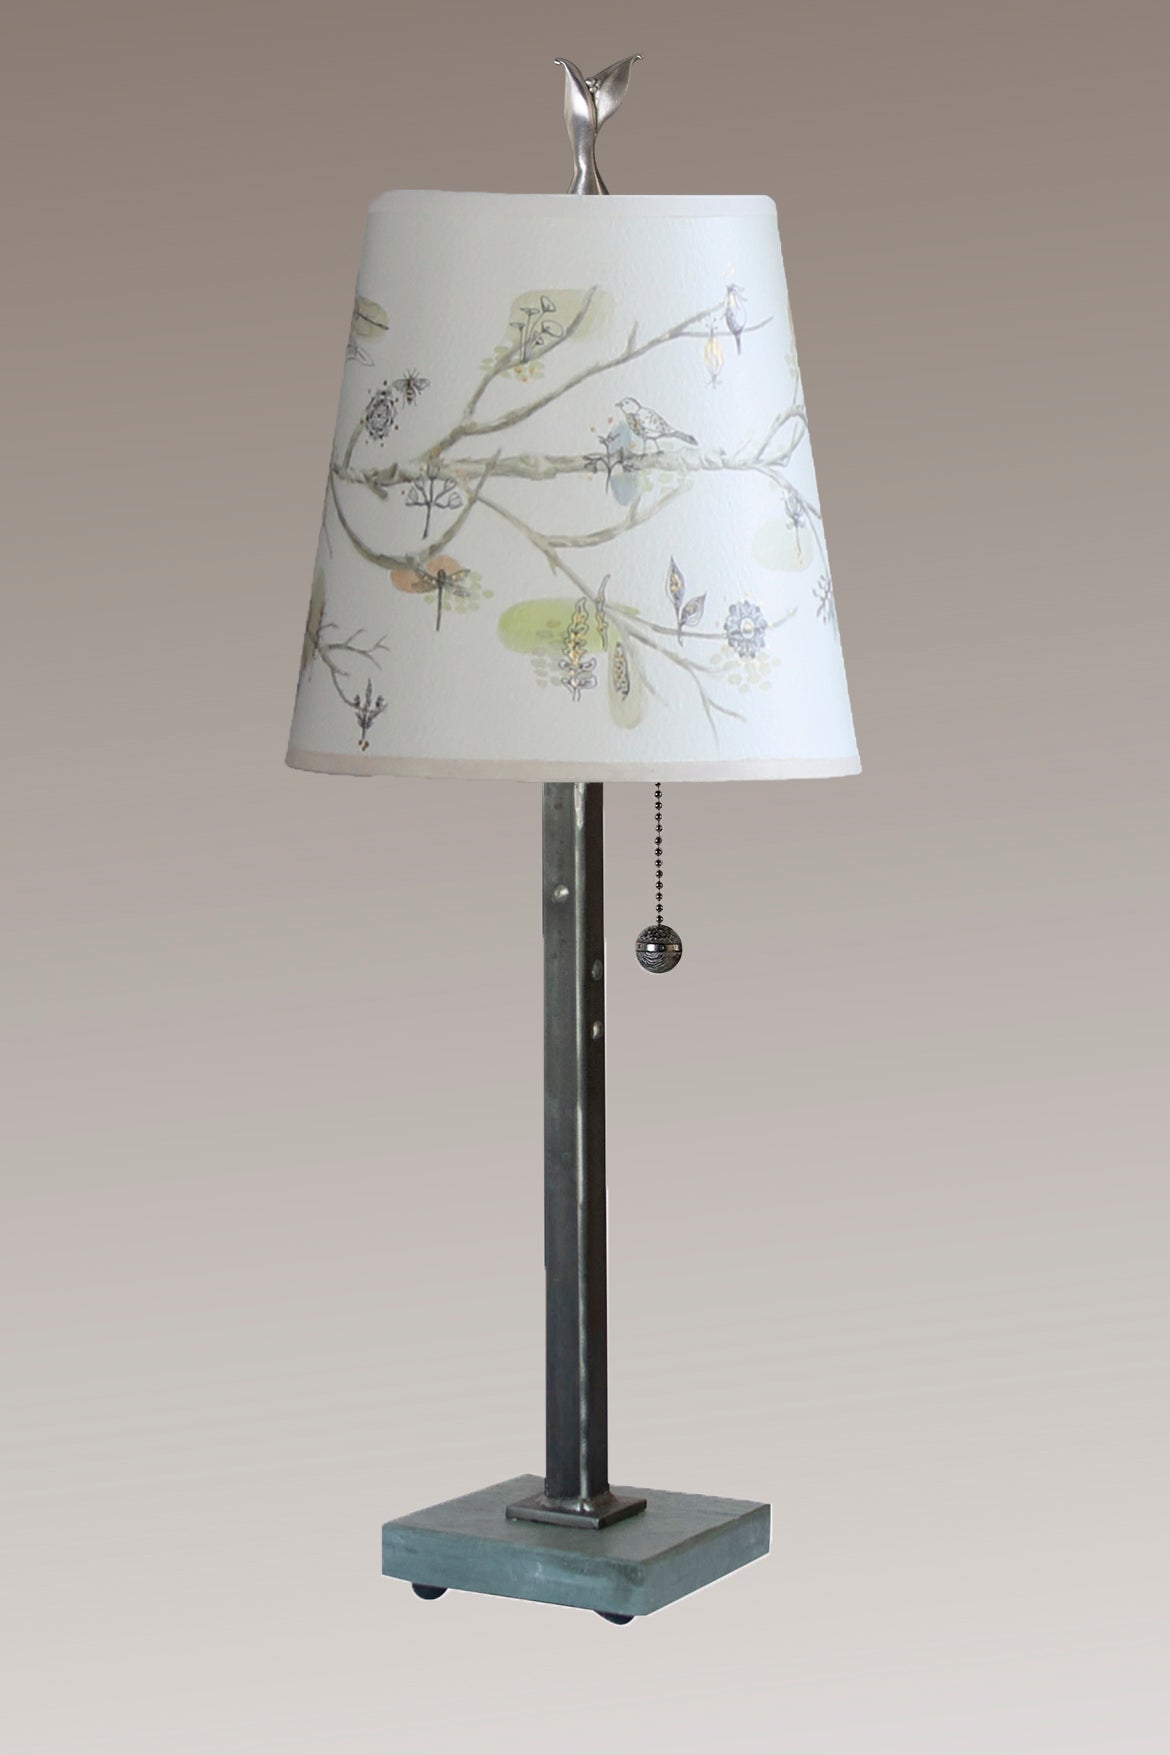 Janna Ugone &amp; Co Table Lamps Steel Table Lamp with Small Drum Shade in Artful Branch